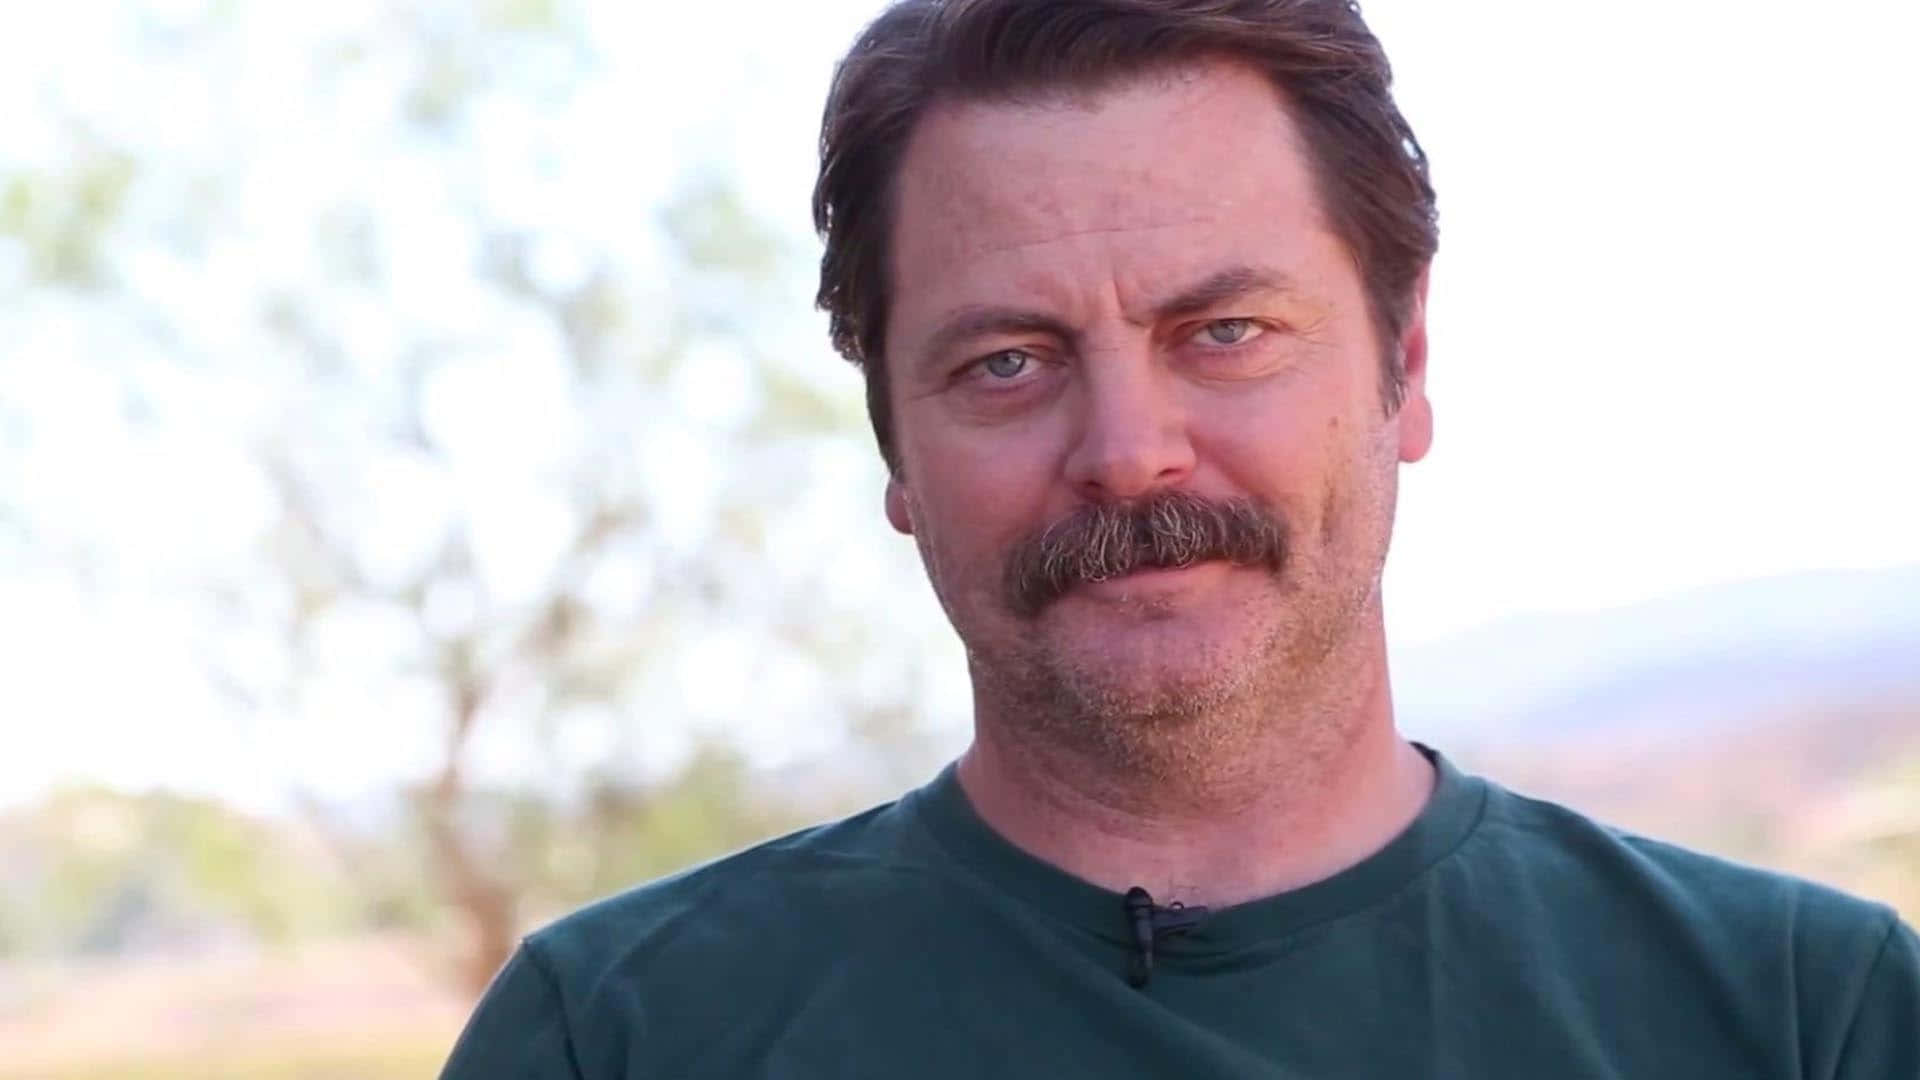 Nick Offerman Looks On In An Environment Of Nature And Peace.